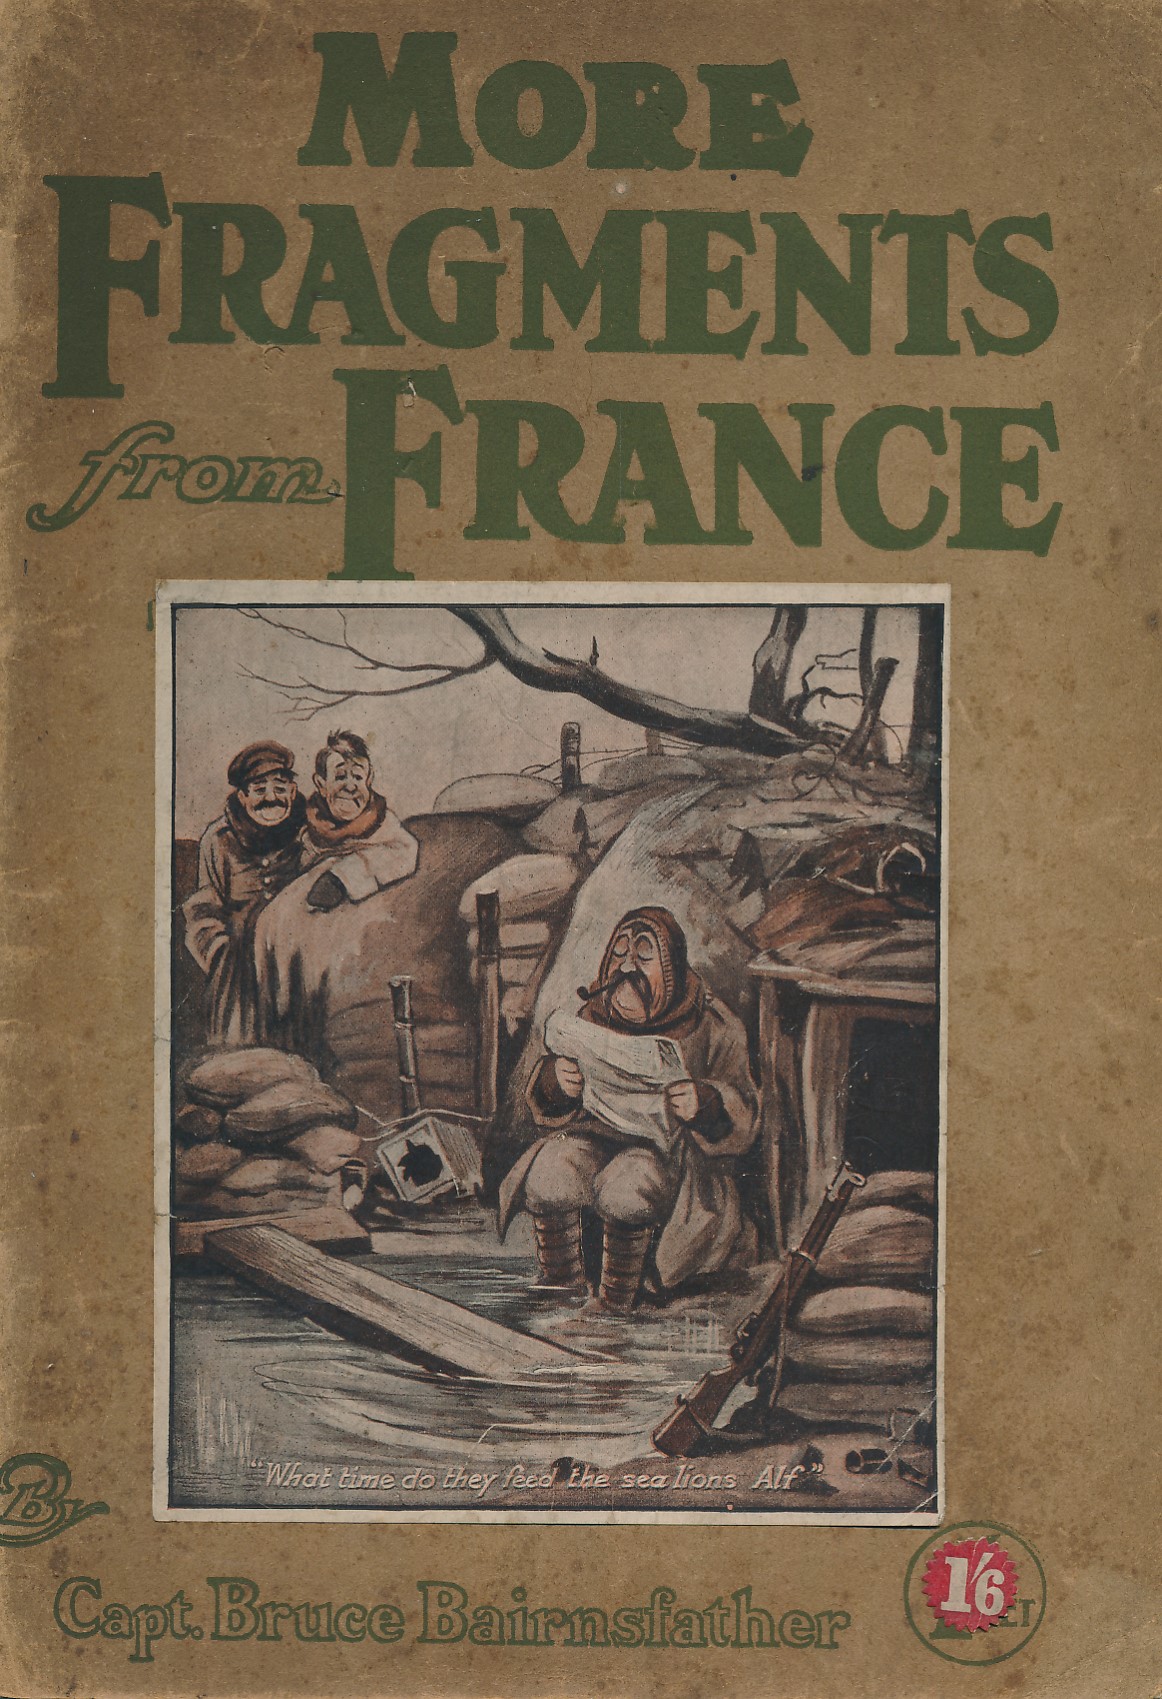 More Fragments from France. Volume II. The Bystander.